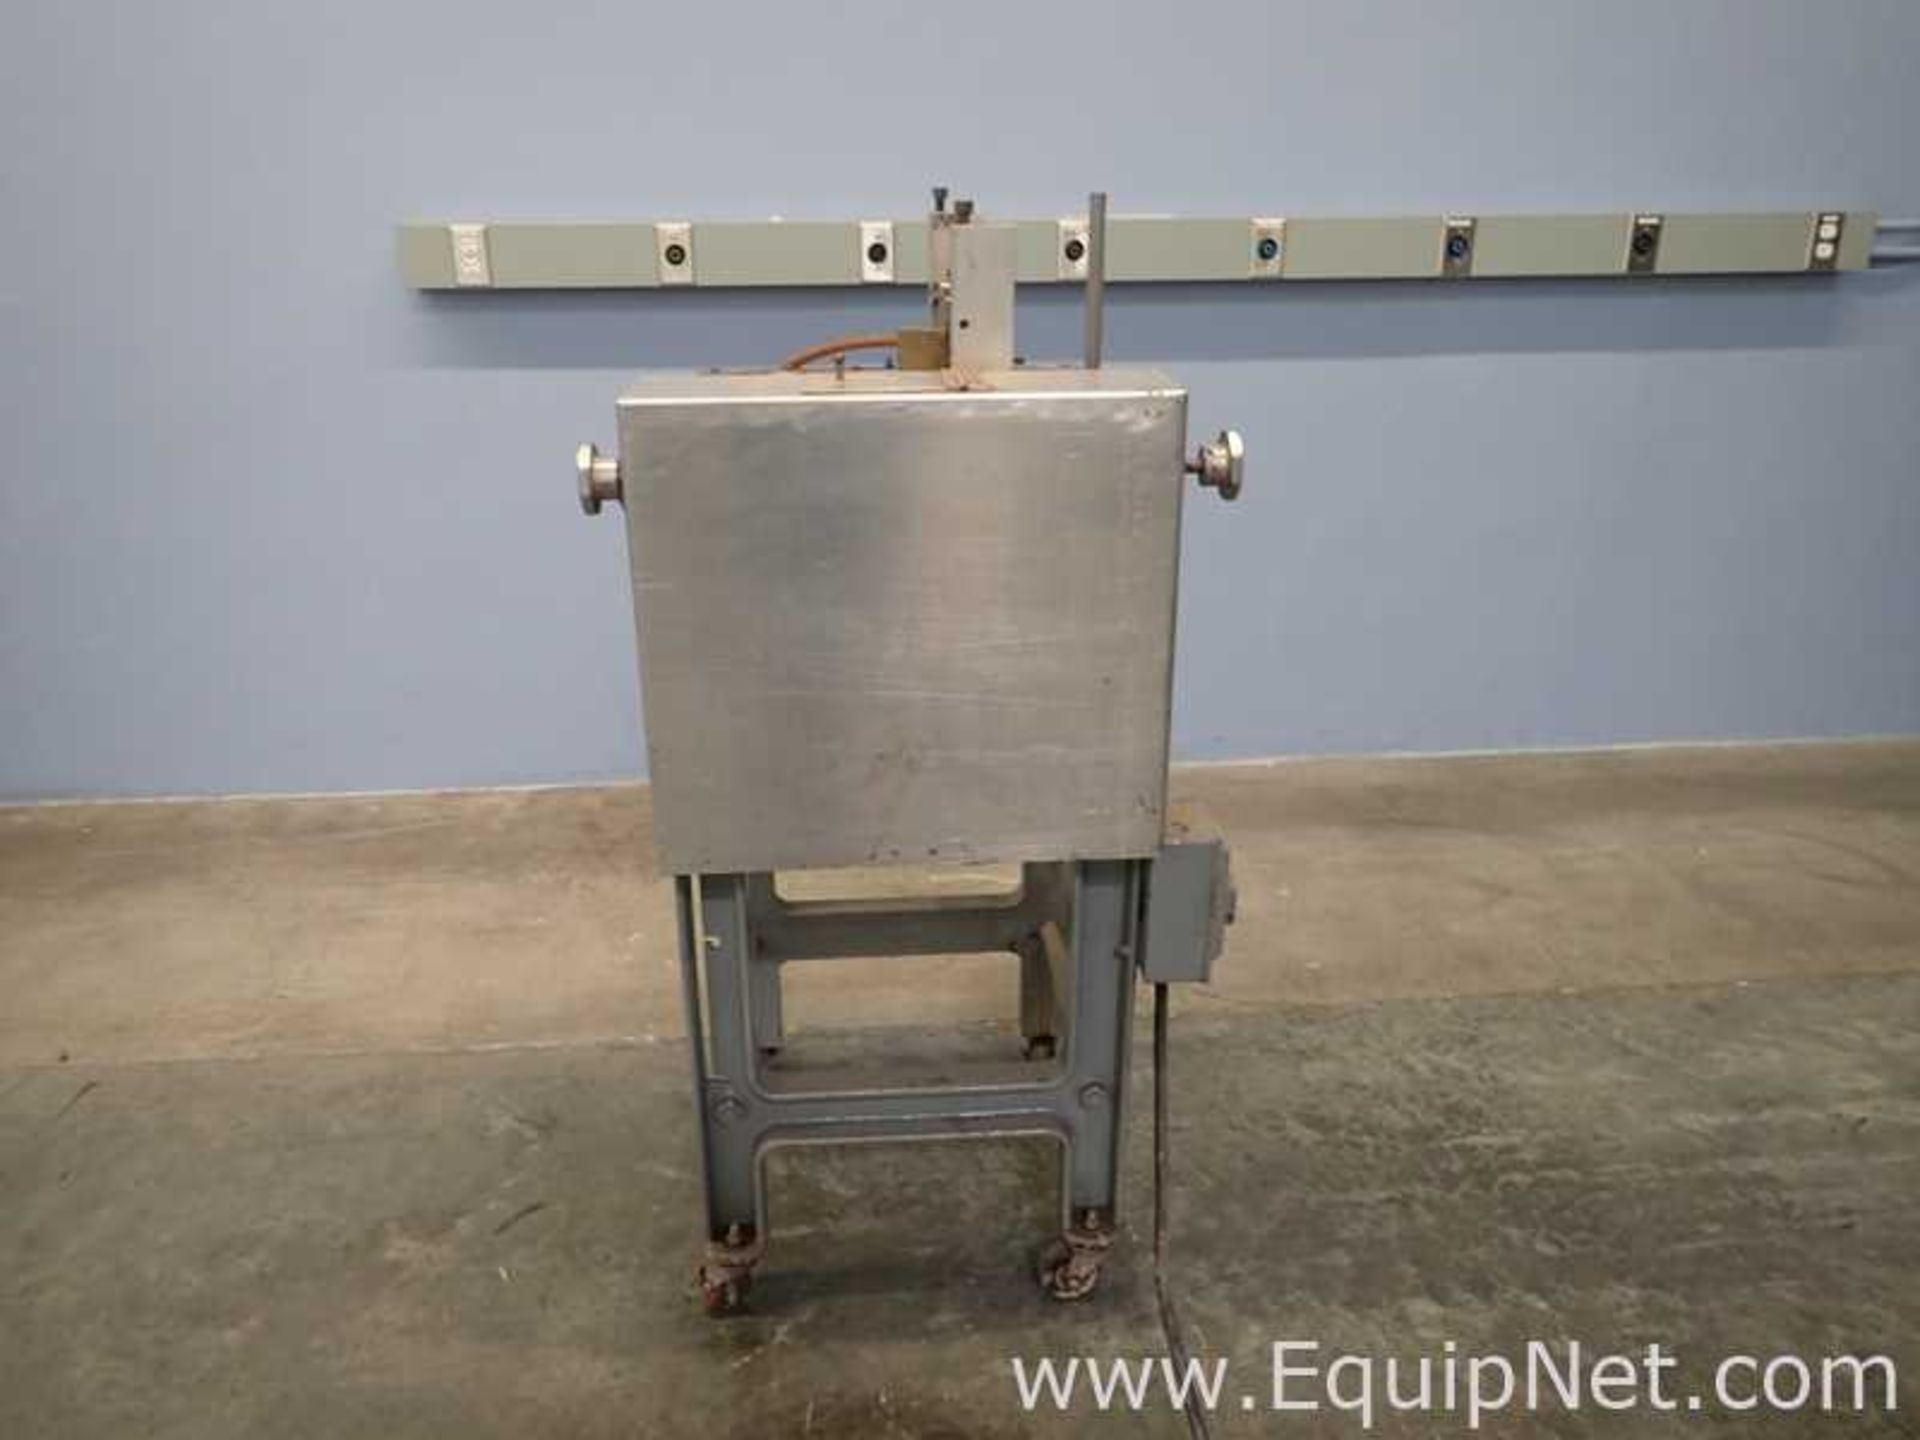 DESCRIPTION: This three roll mill is appx 12" in length EQUIPNET LISTING # 720238 HANDLING FEE: $ - Image 19 of 19